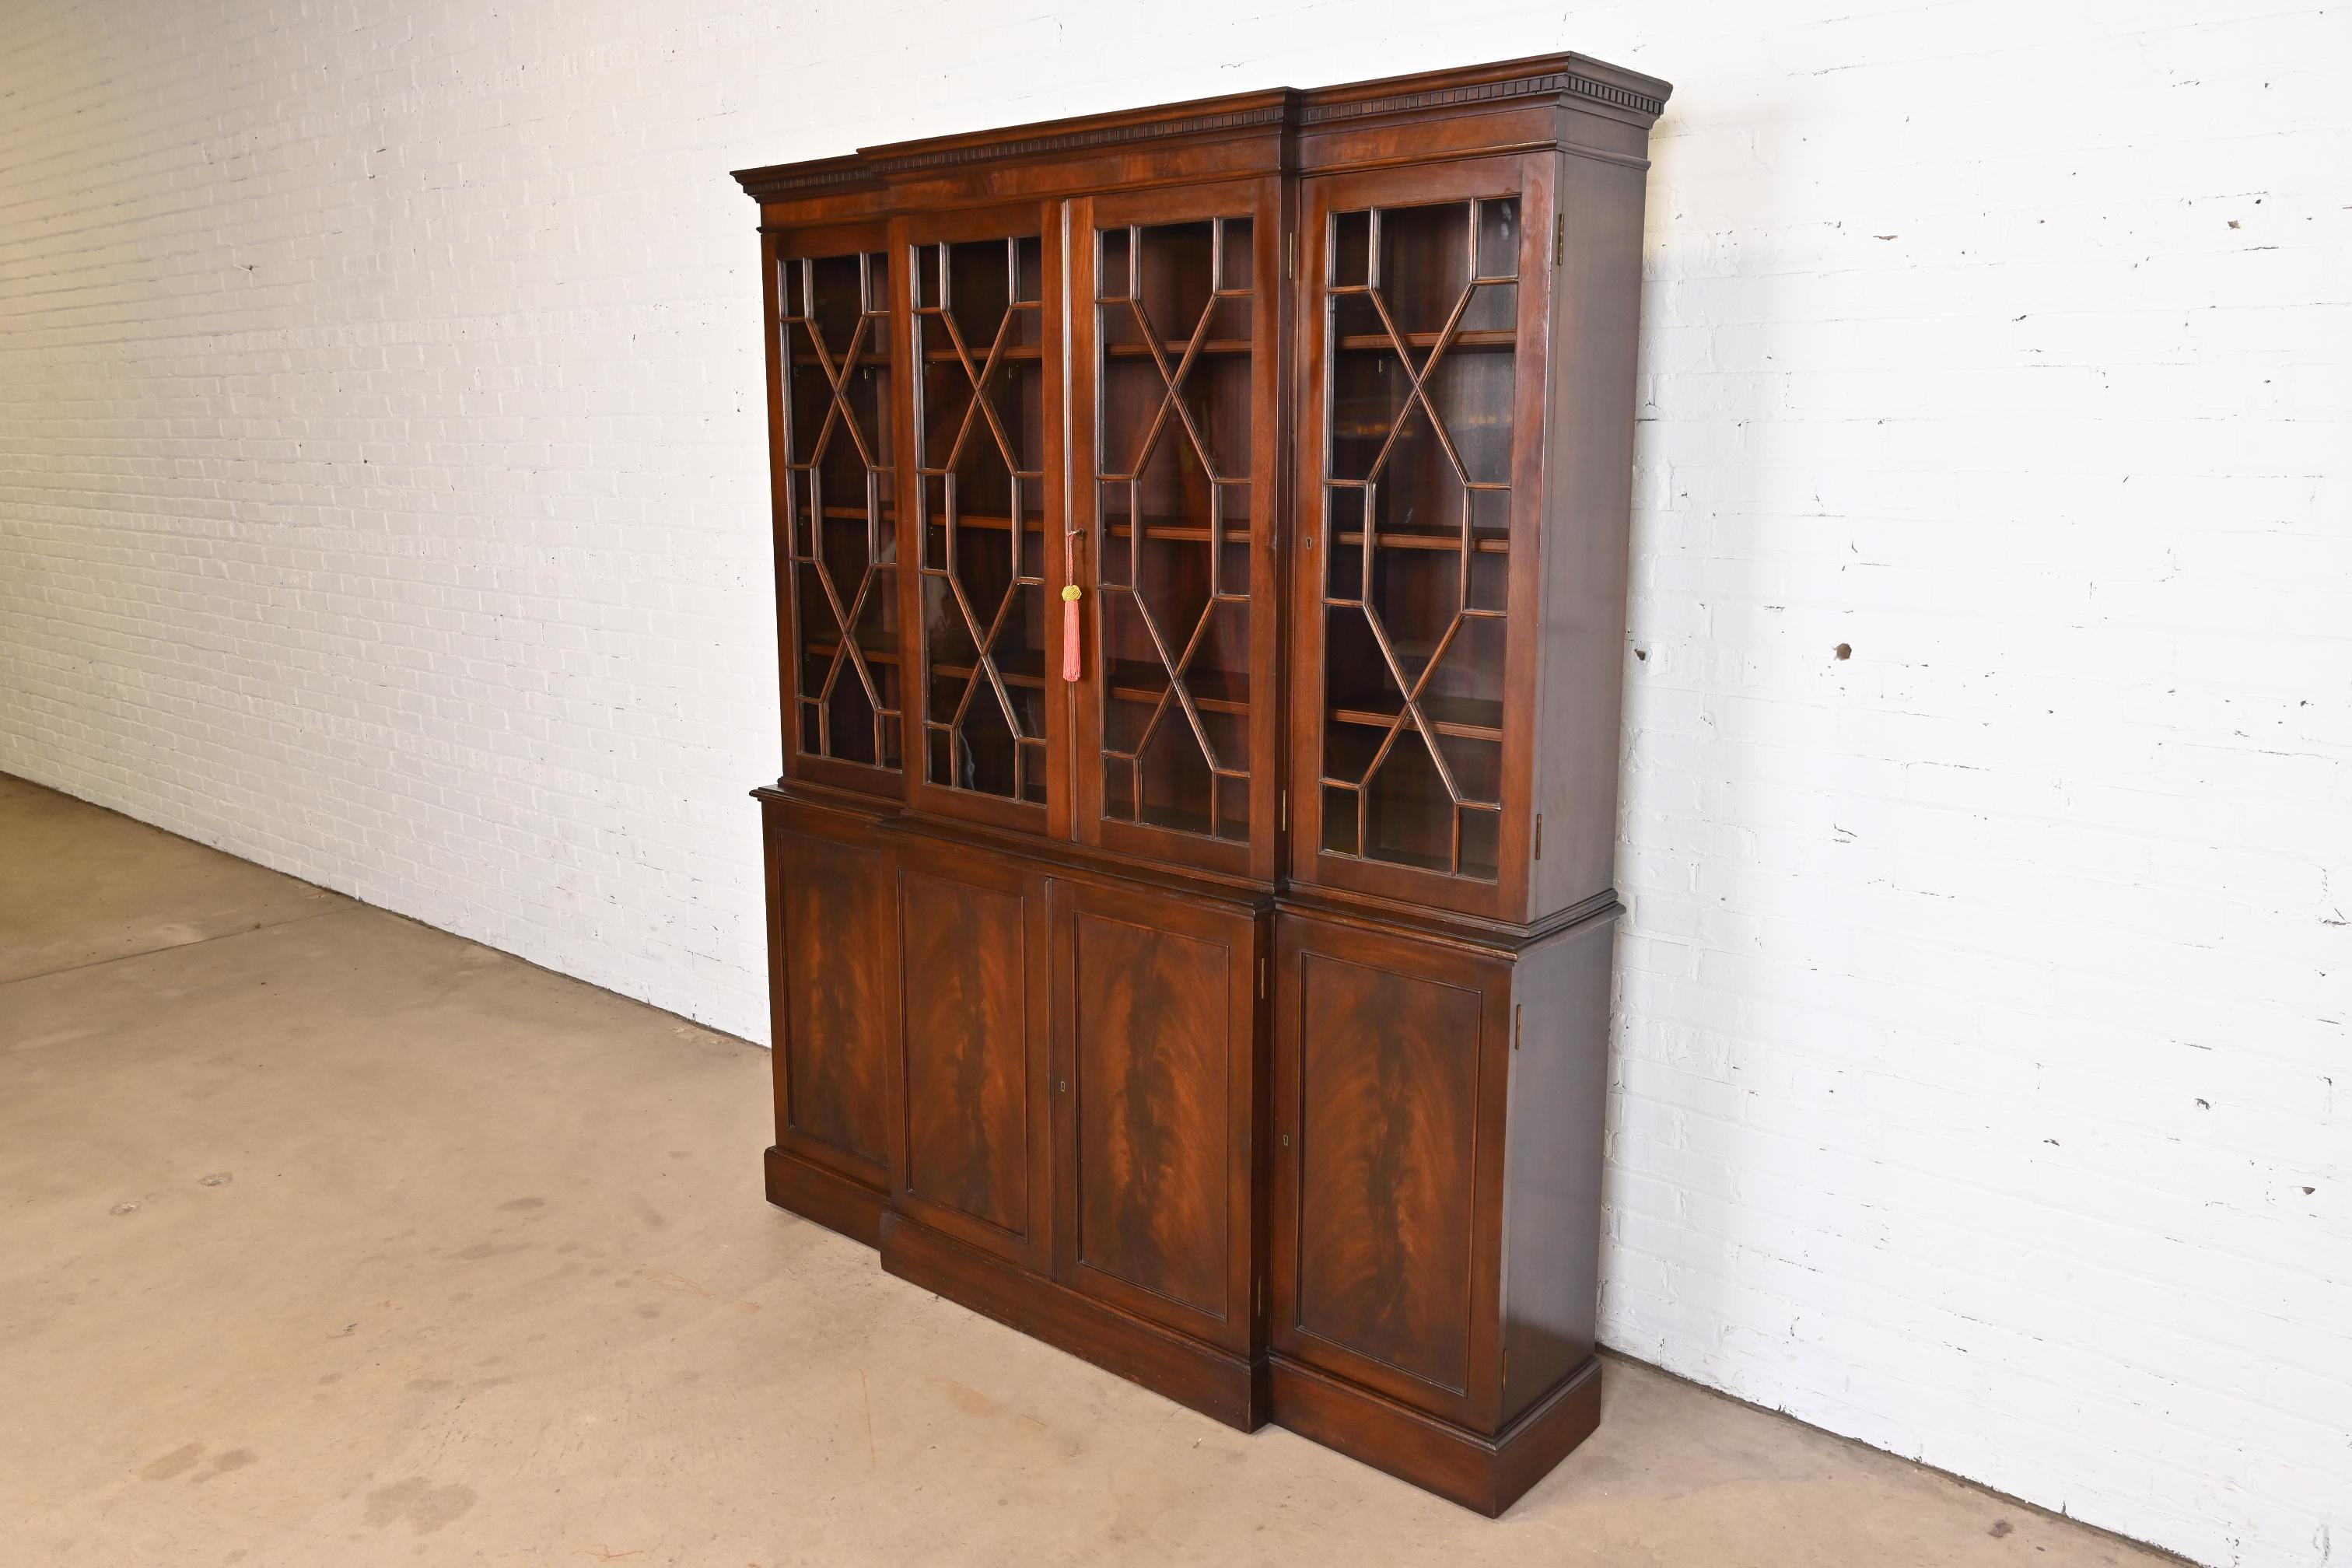 A gorgeous Georgian style breakfront bookcase cabinet

In the manner of Baker Furniture

USA, Mid-20th Century

Book-matched flame mahogany, with mullioned glass front doors. Upper and lower cabinets lock, and key is included.

Measures: